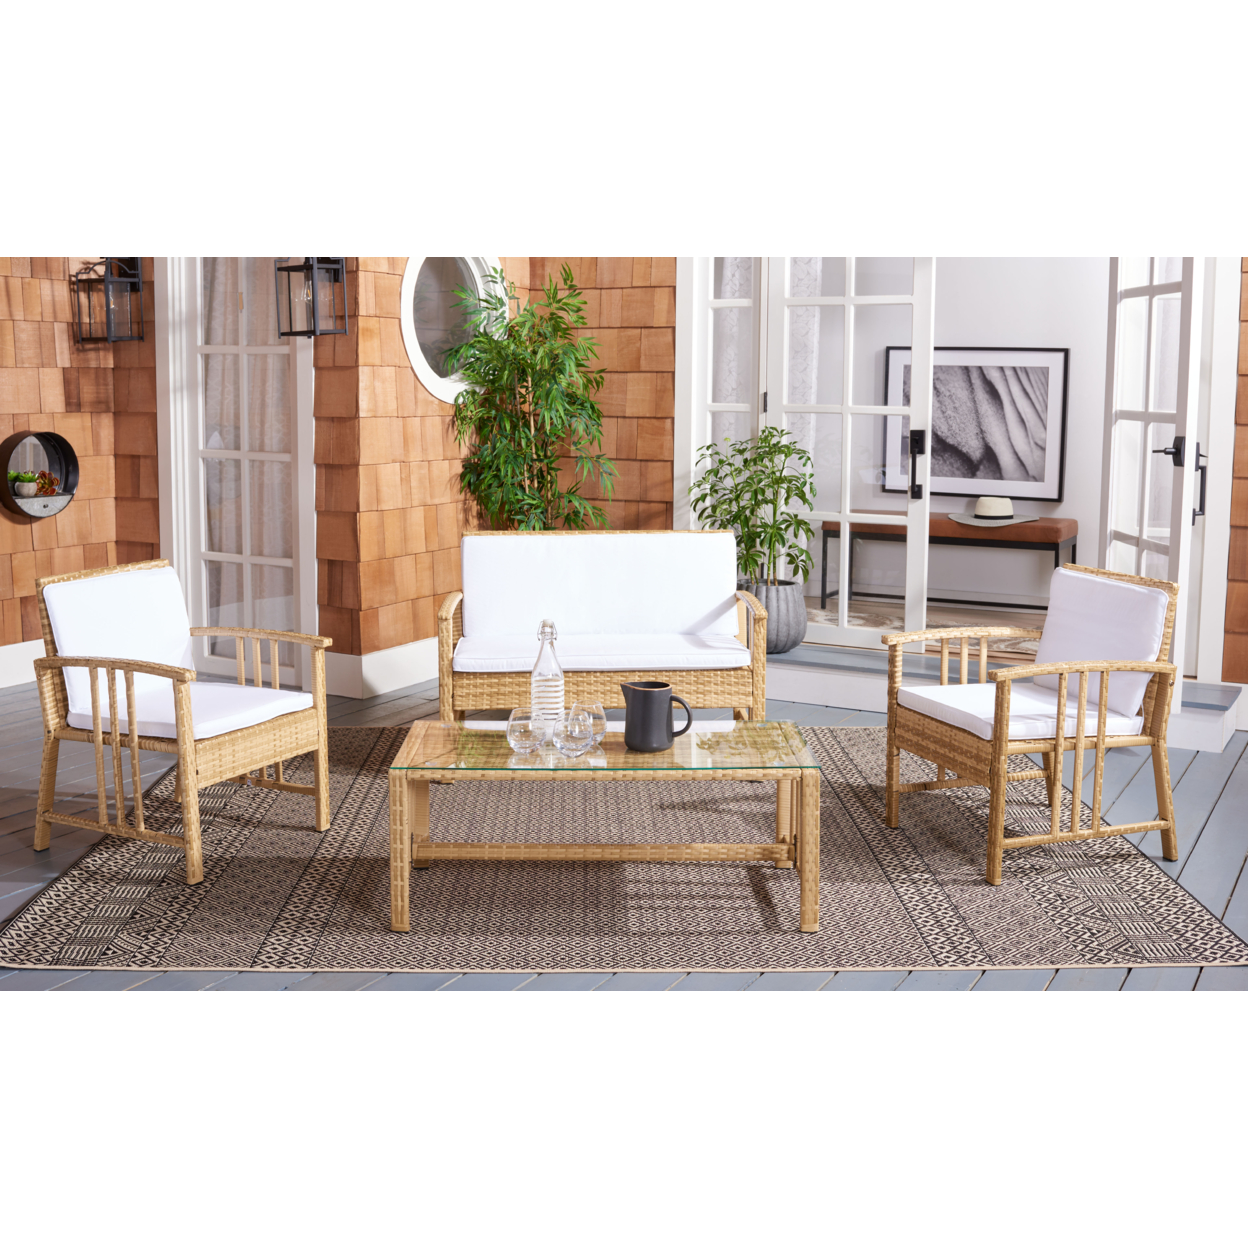 SAFAVIEH Outdoor Collection Reslor 4-Piece Patio Set Natural/White Cushion